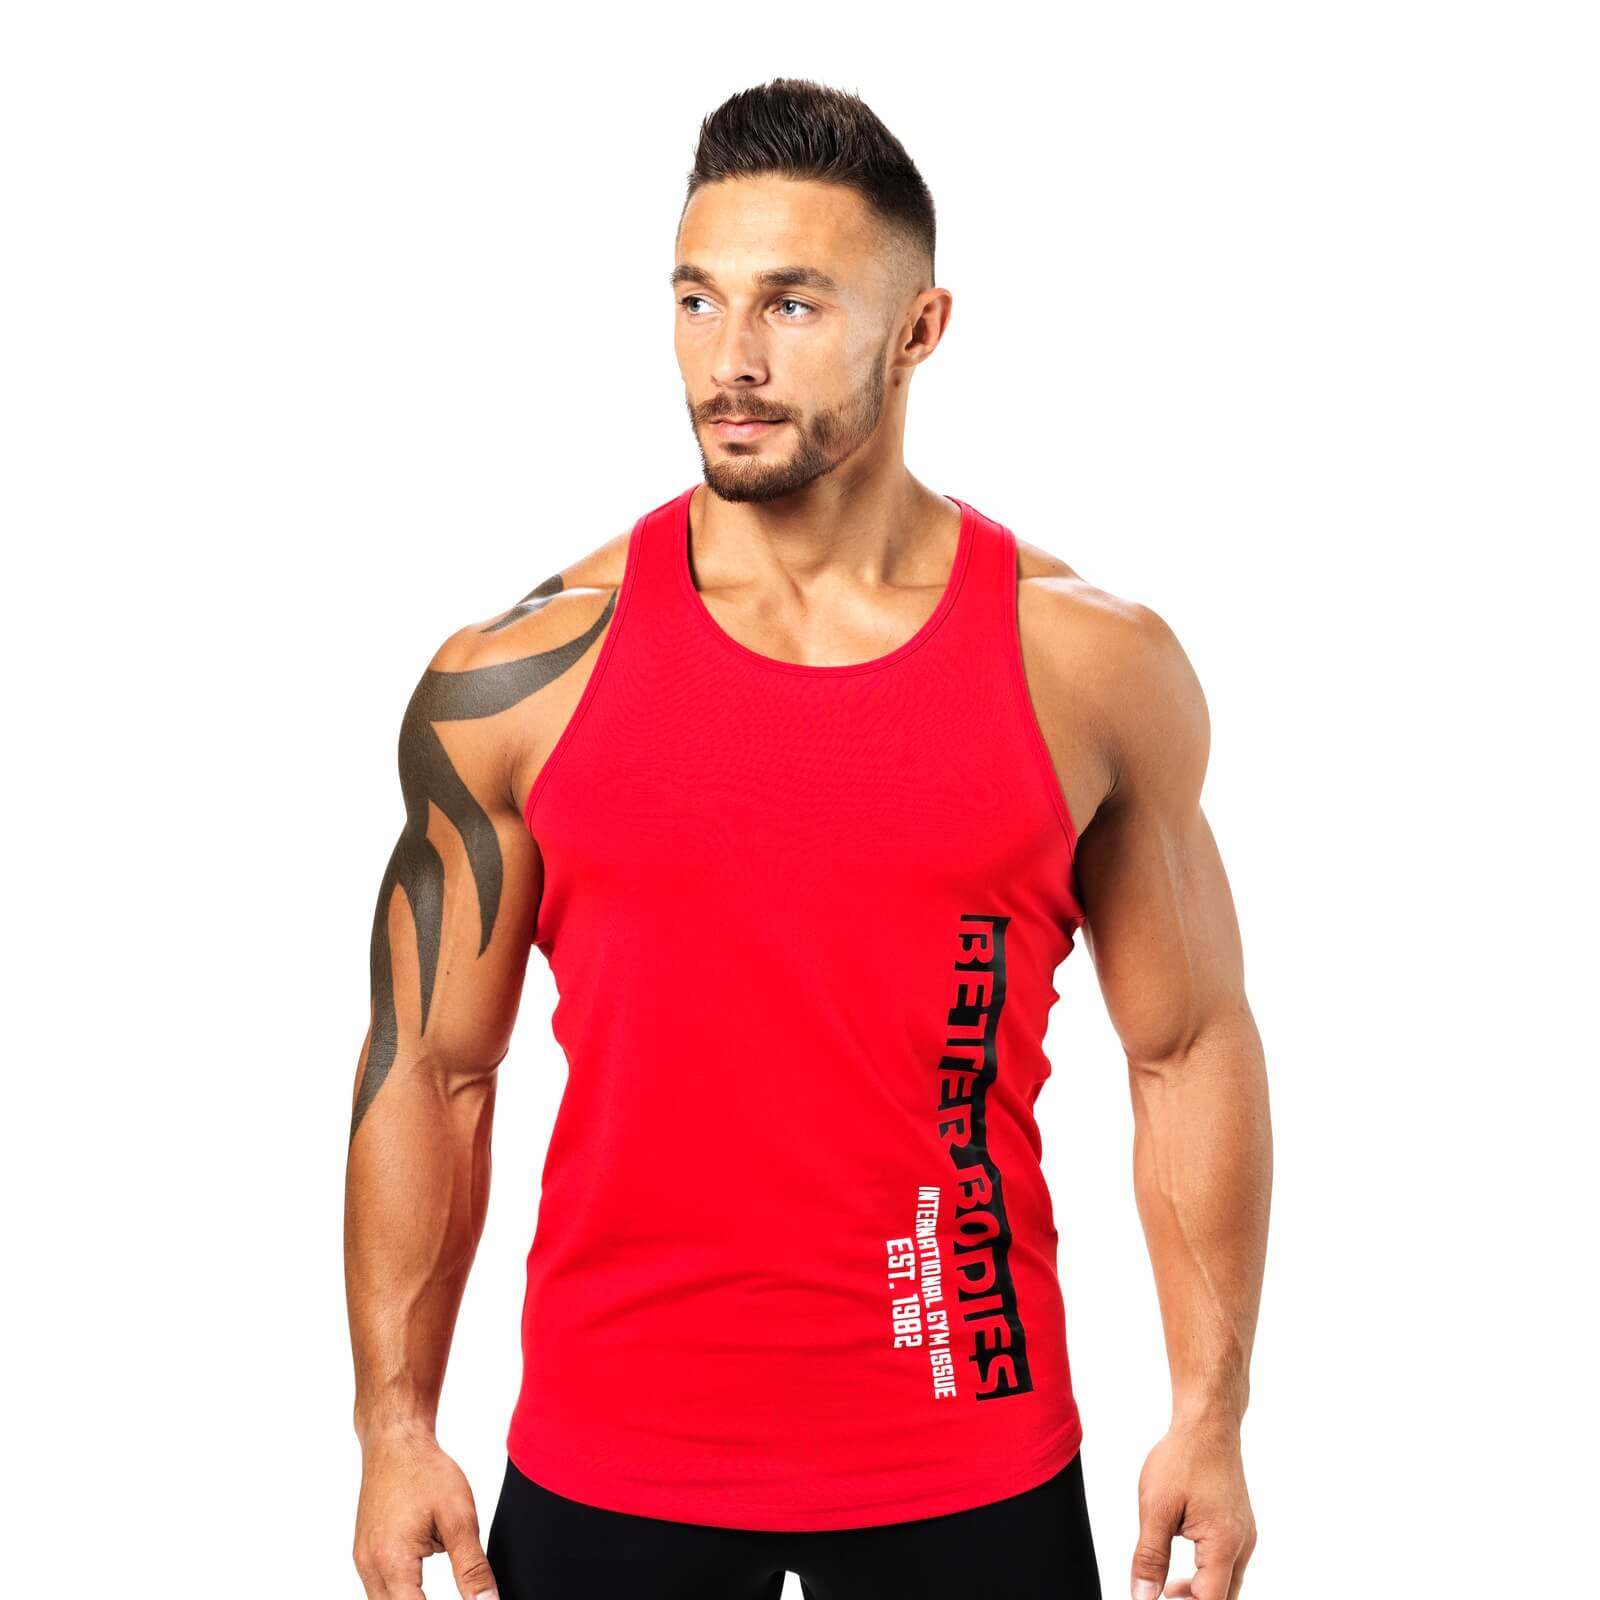 Performance T-back, bright red, Better Bodies